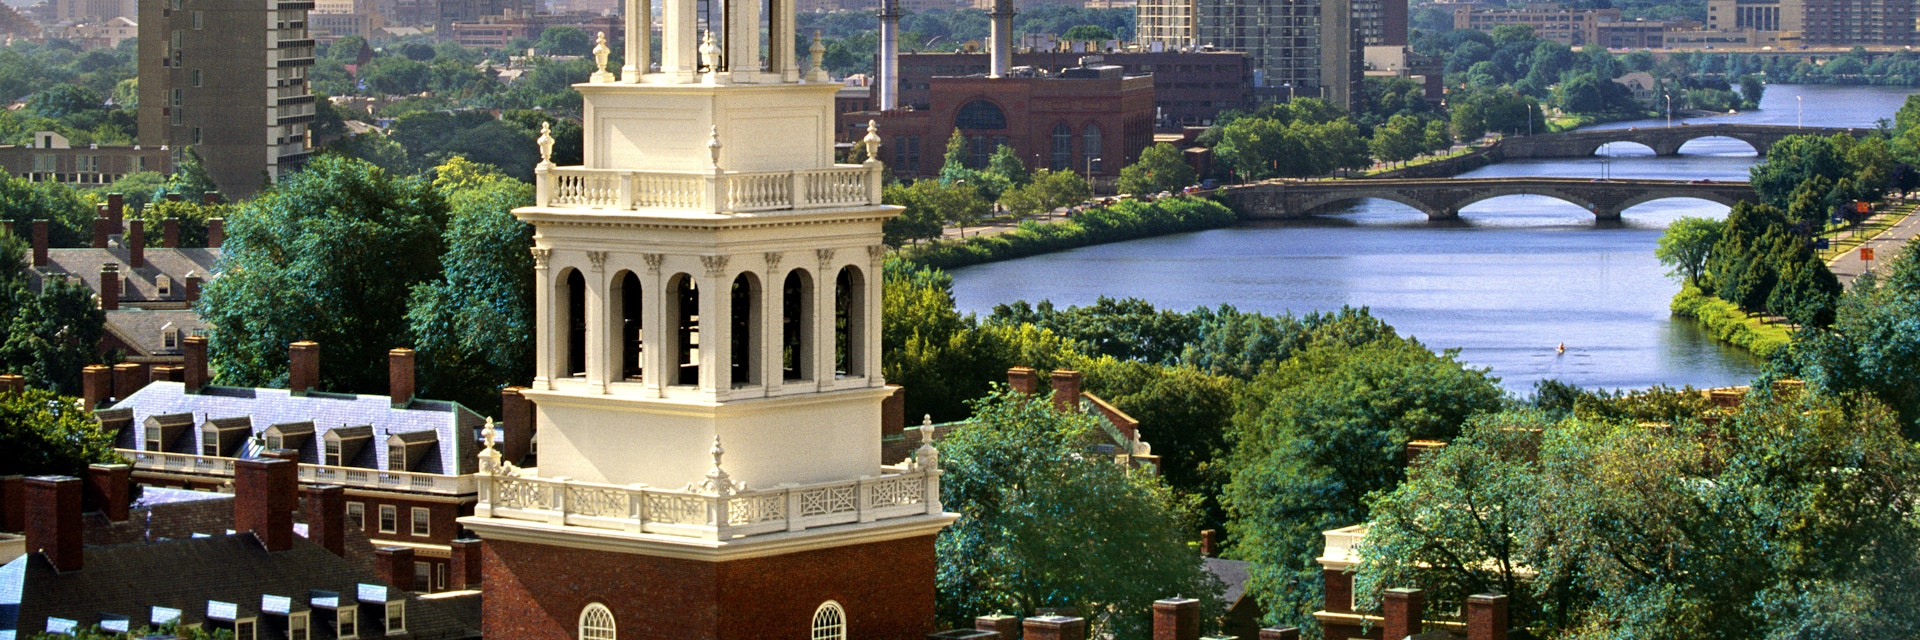 Elevated view, Lowell House, Harvard Square, Harvard University and Charles River.